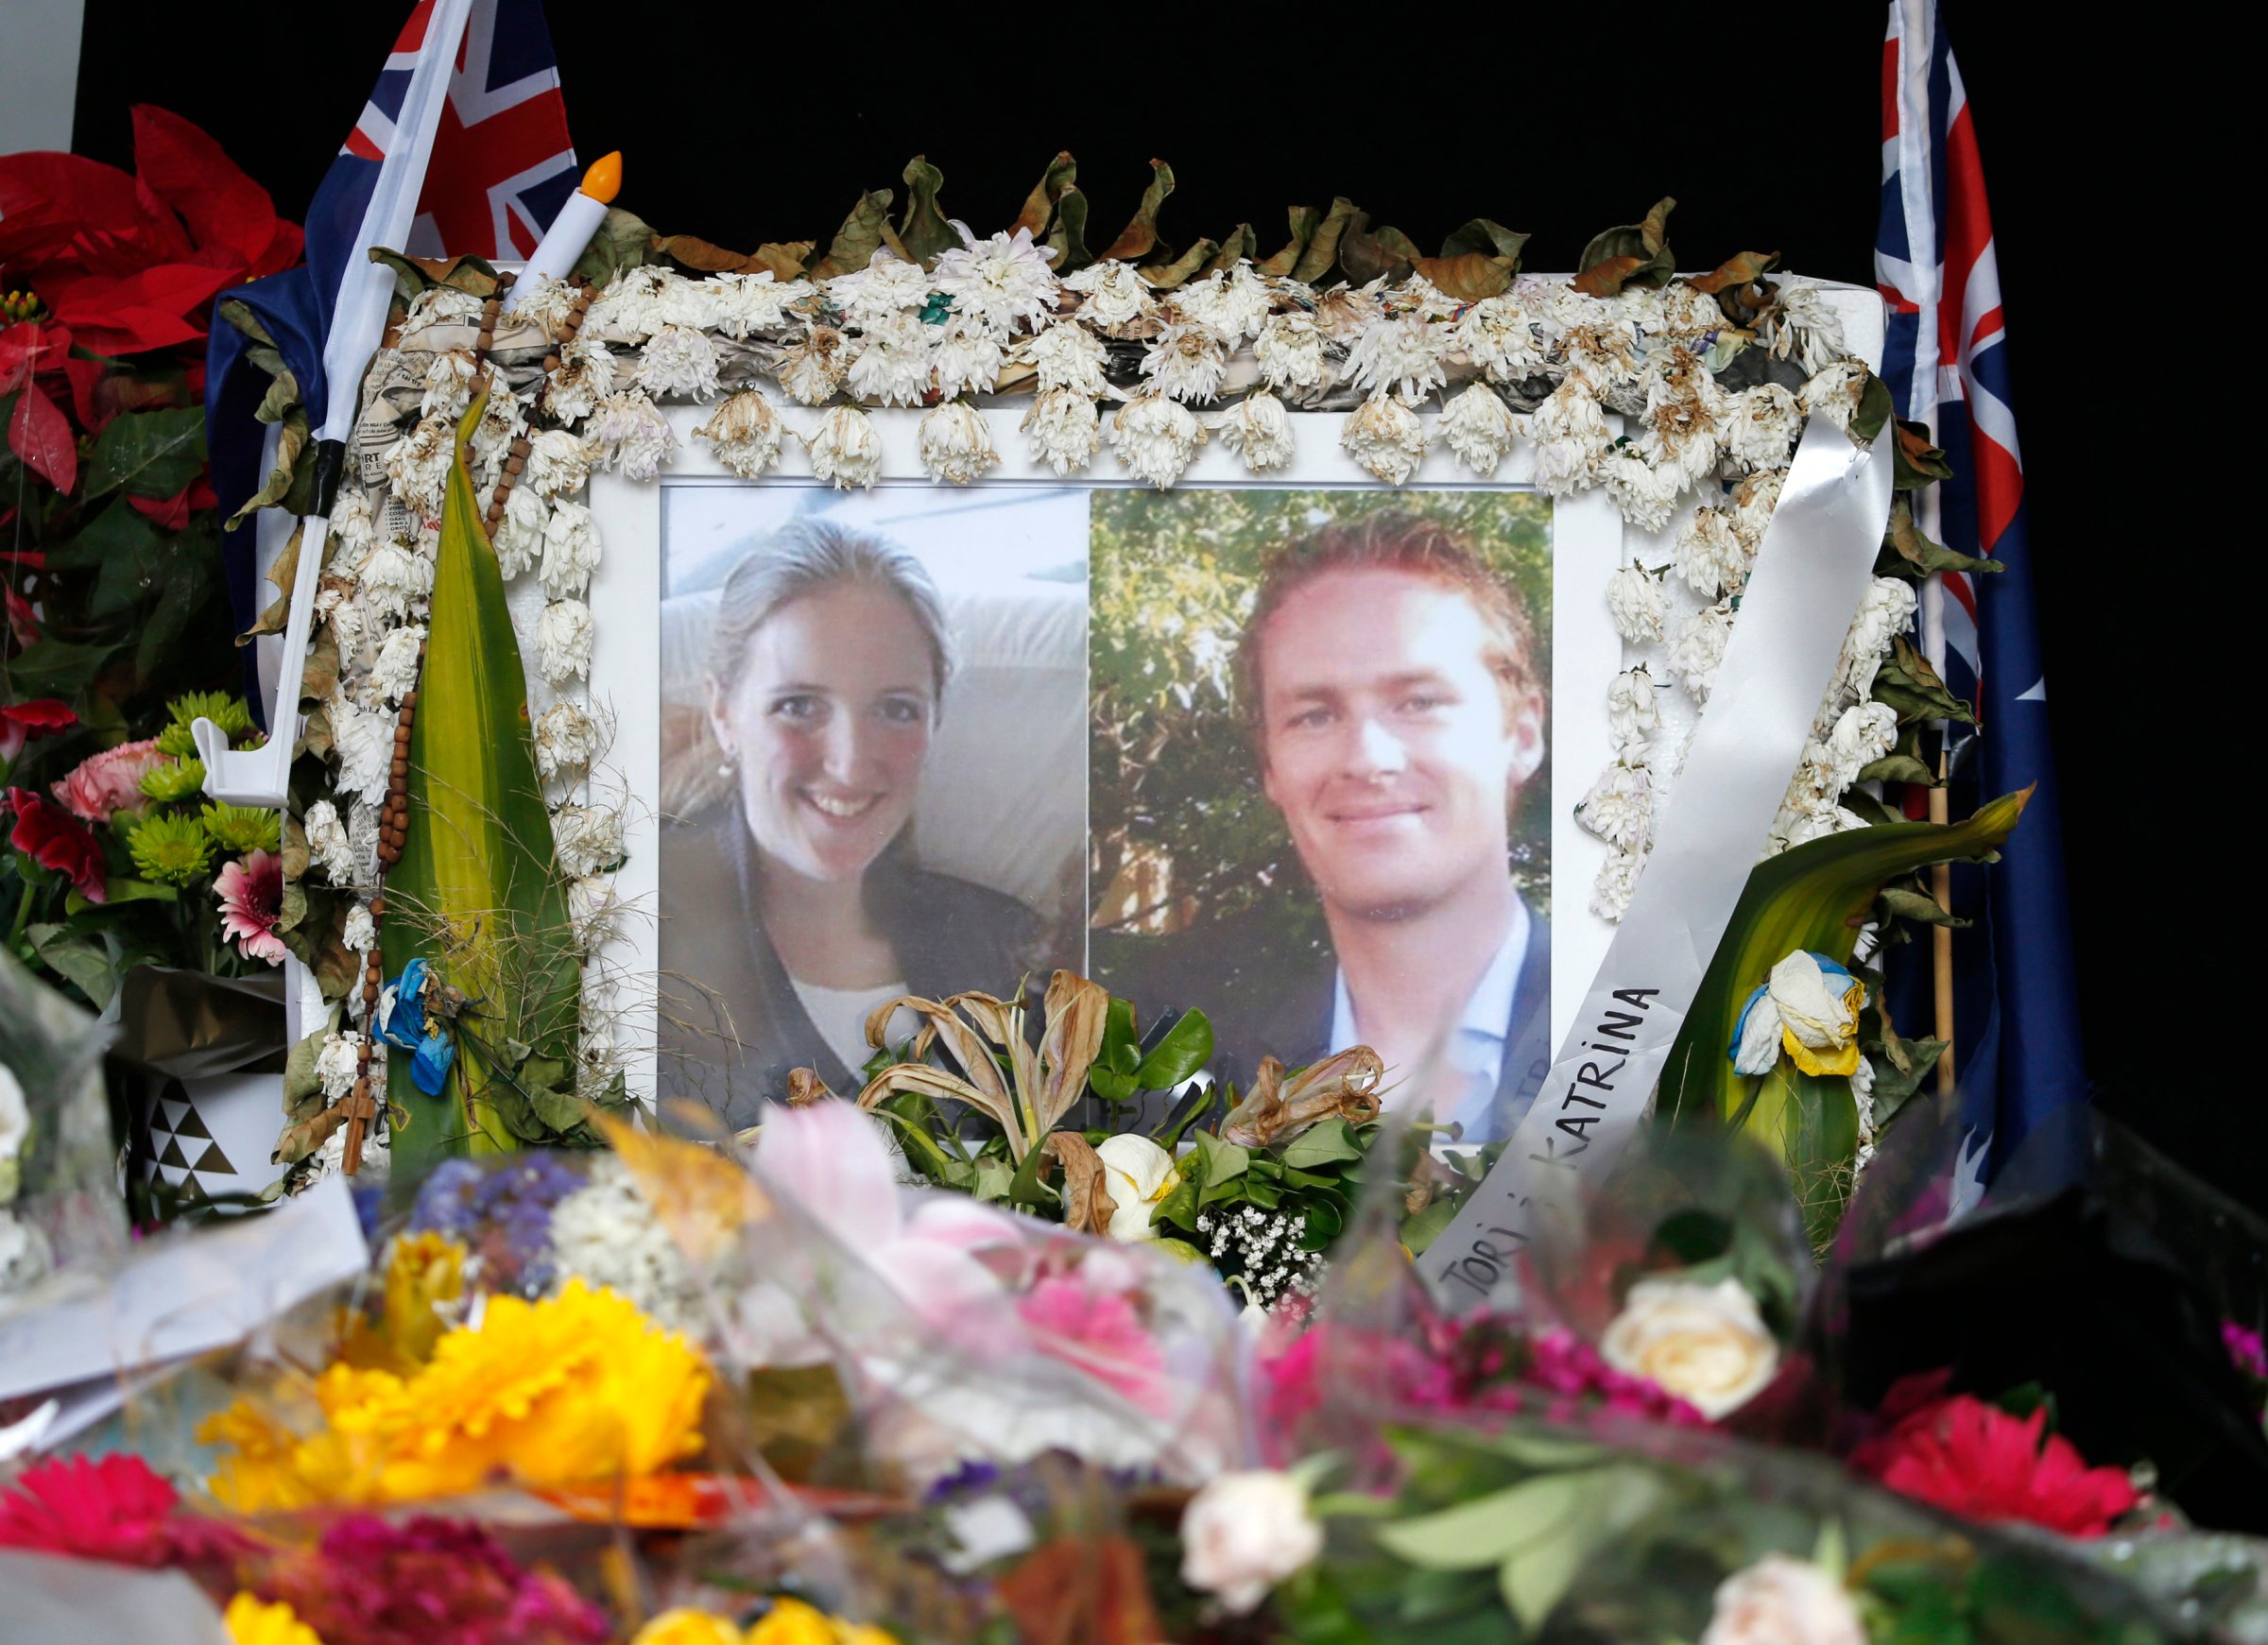 Photographs of Sydney's cafe siege victims, lawyer Katrina Dawson and cafe manager Tori Johnson are displayed in a floral tribute near the site of the siege in Sydney's Martin Place